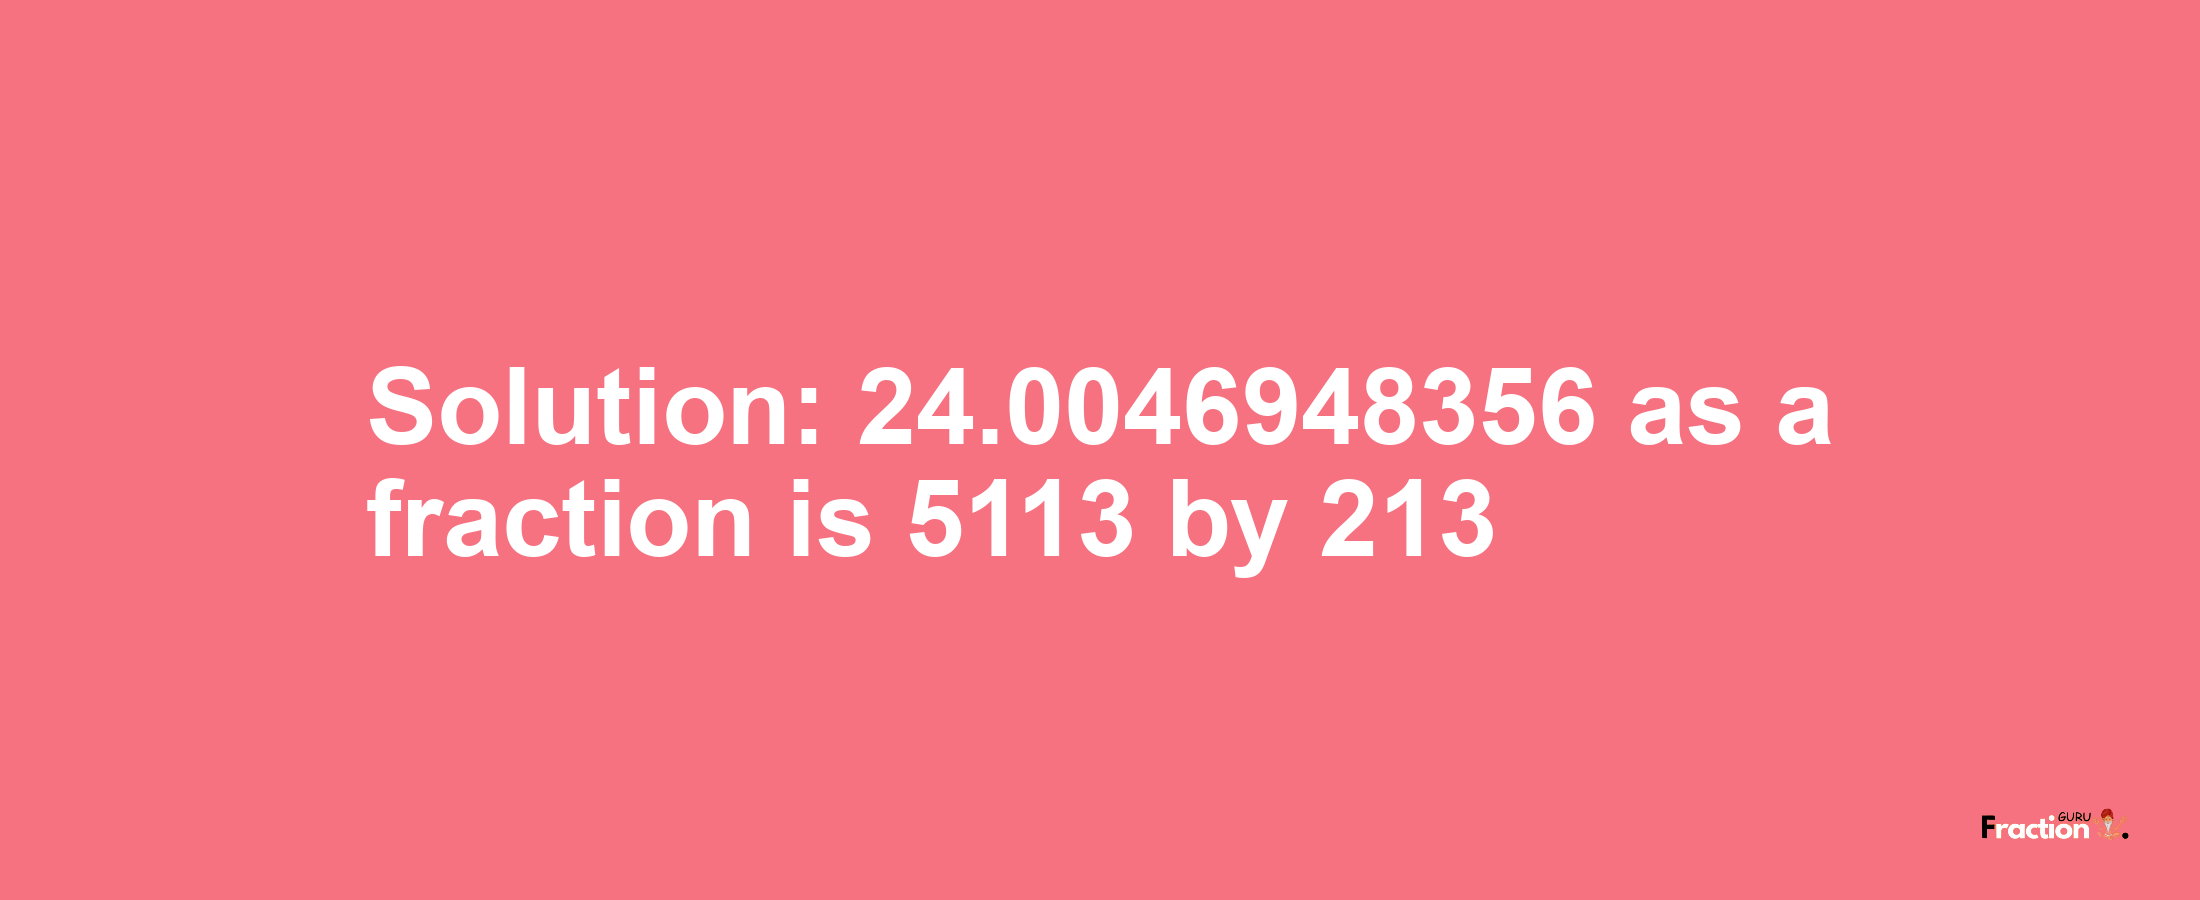 Solution:24.0046948356 as a fraction is 5113/213